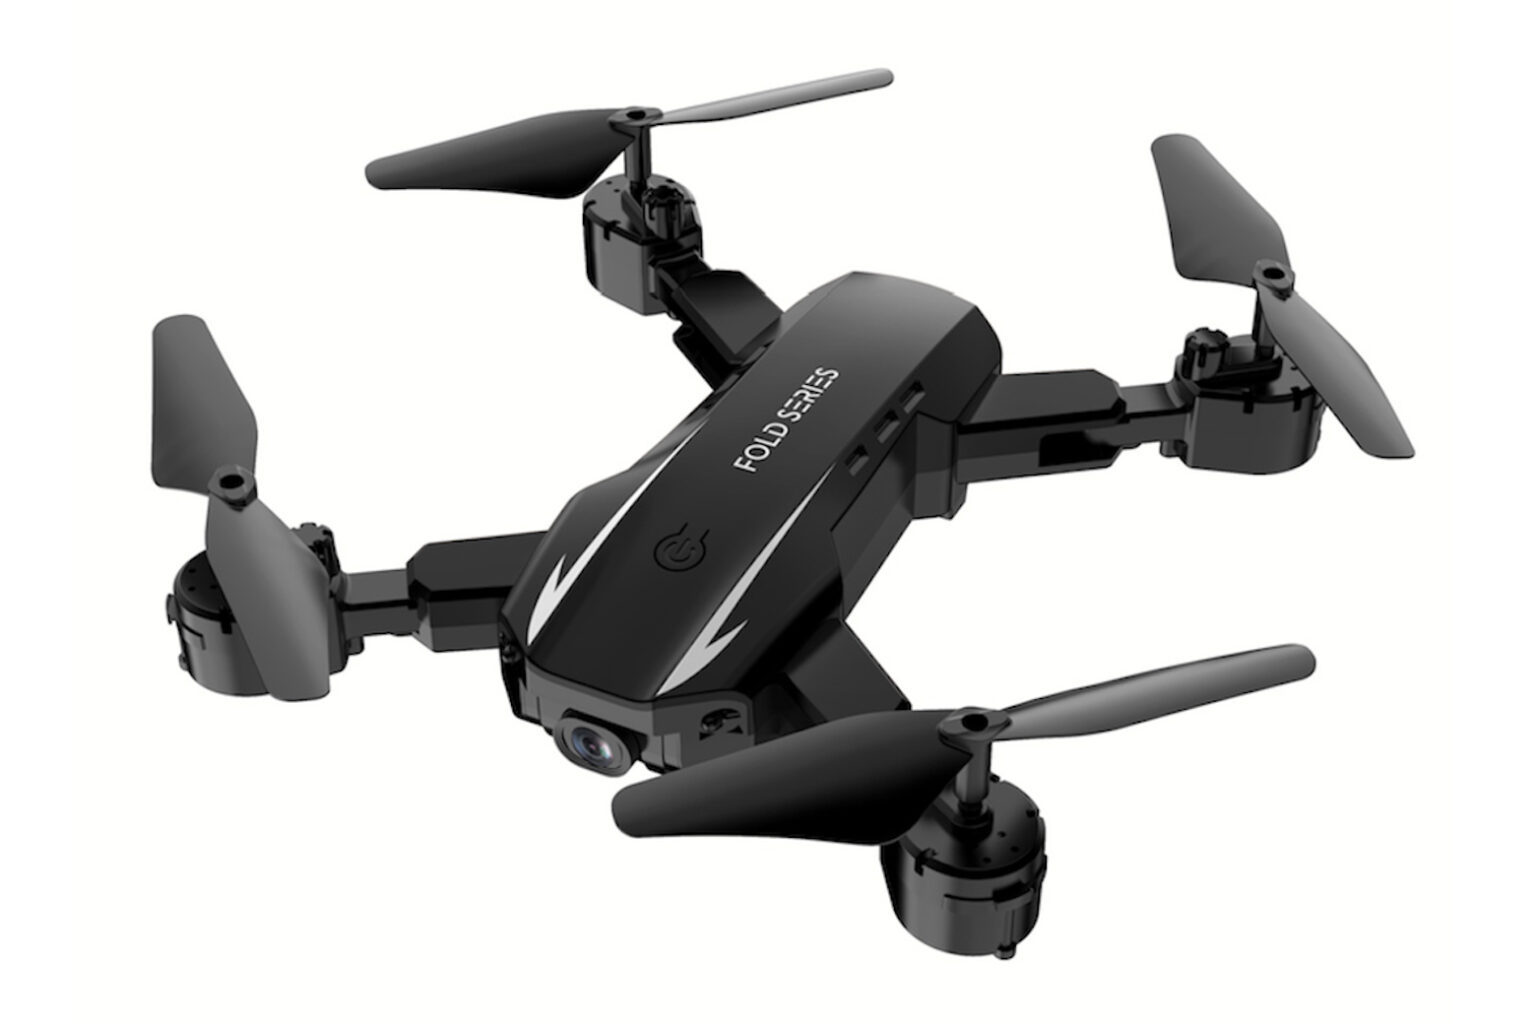 Save $120 on this advance 4K dual-camera drone during Labor Day pricing.